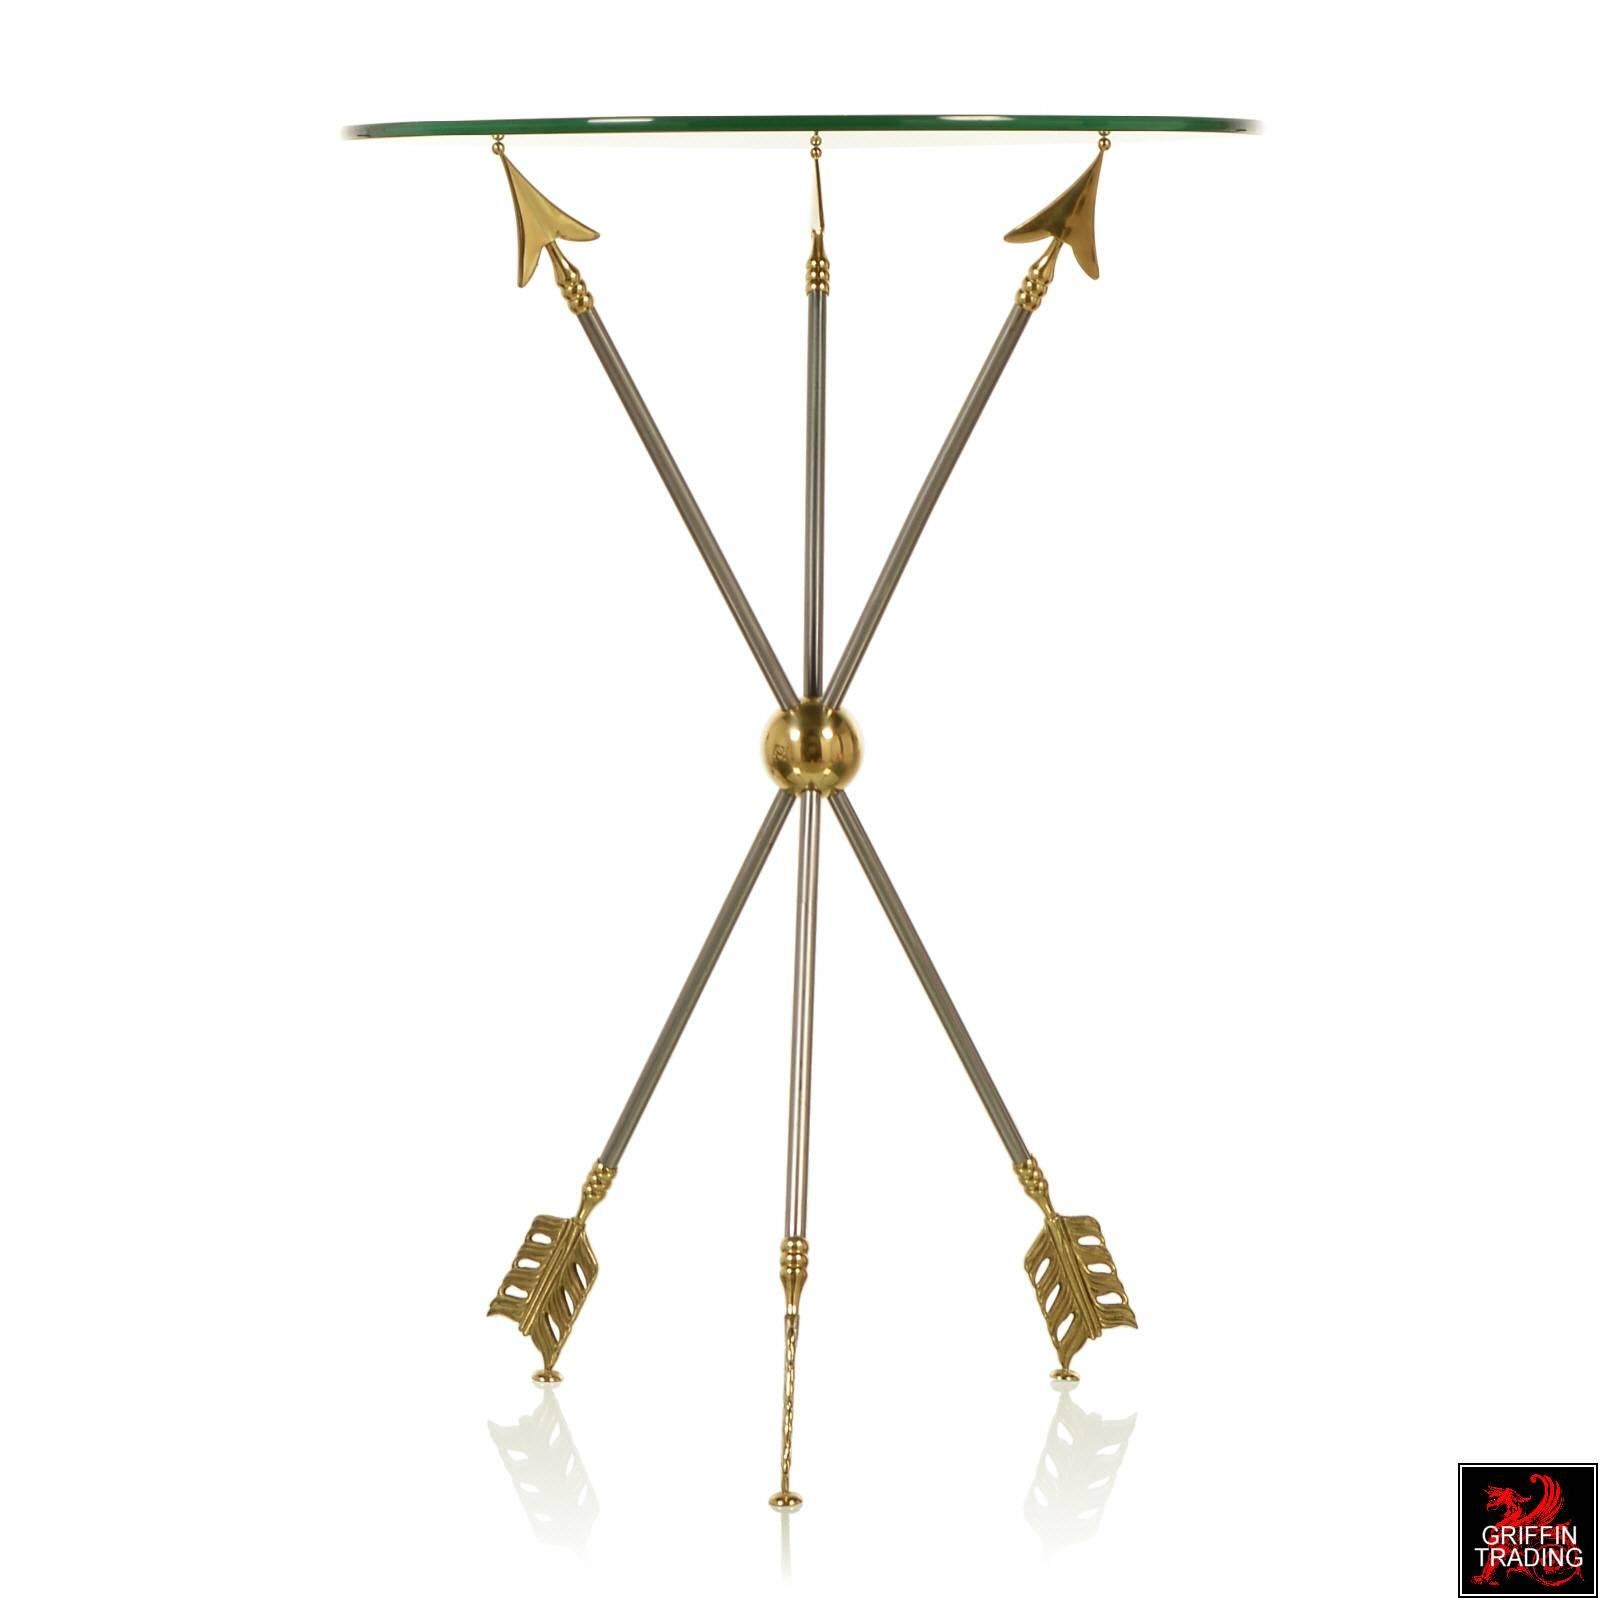 Lovely neoclassical style gueridon by Maison Jansen. This striking side table has a beveled glass top with distinctive tripod base made of steel arrows with brass arrowheads and feathers. The perfect accent table for that Hollywood Regency